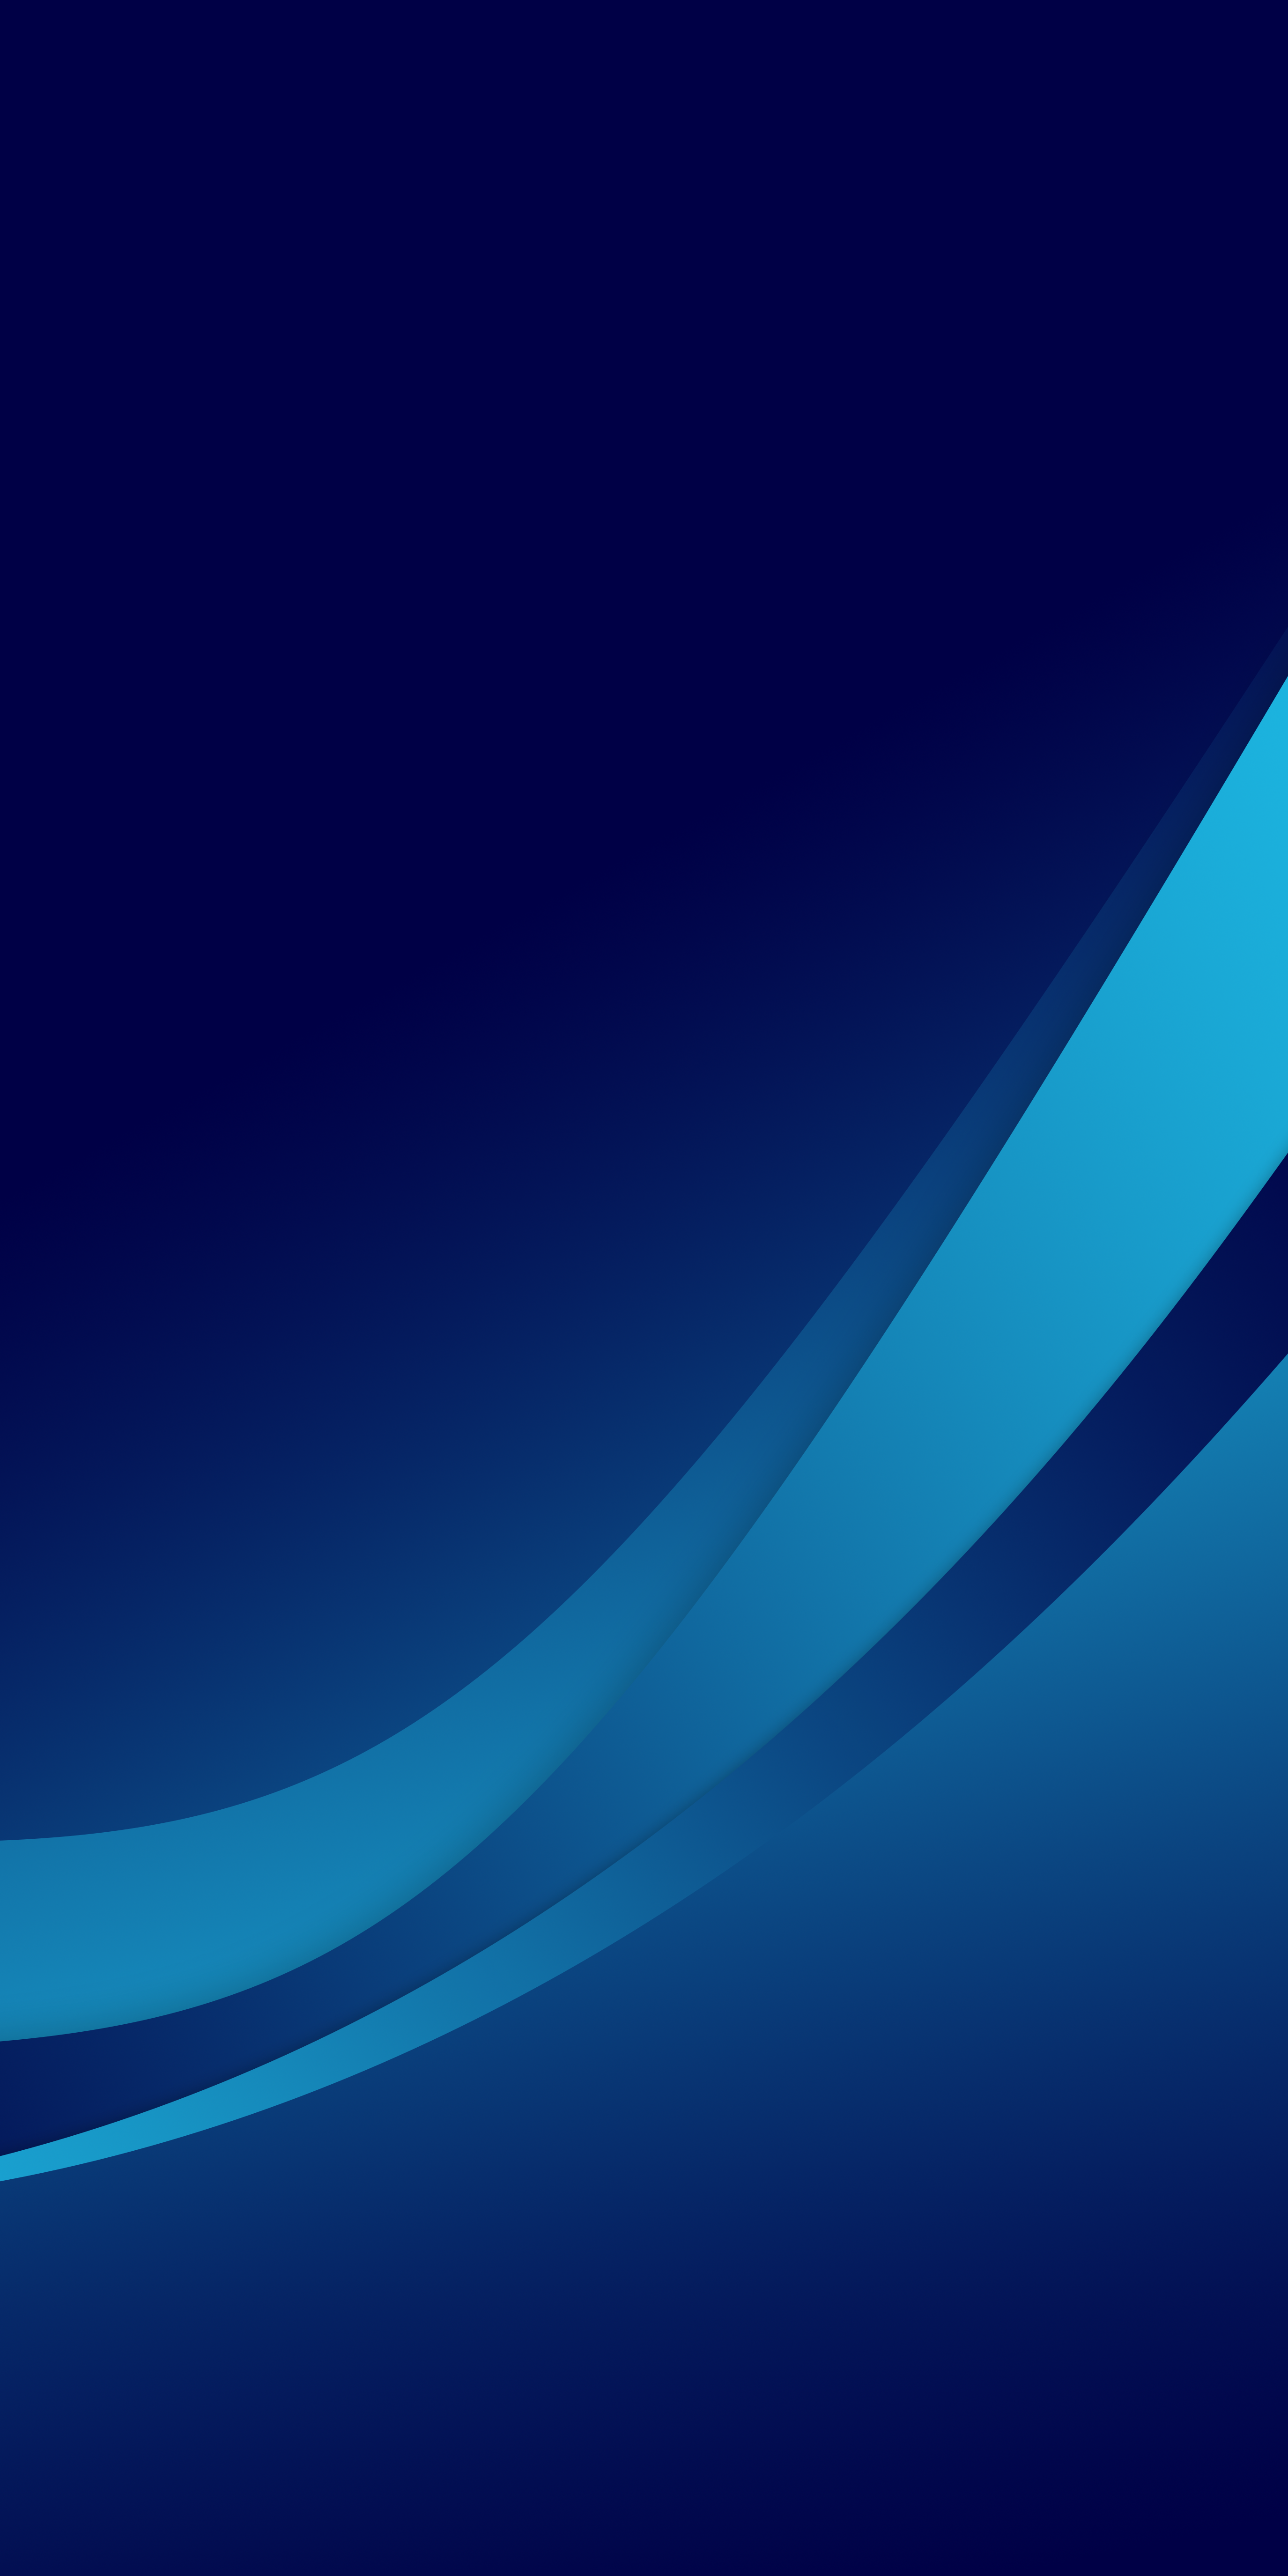 The swoopiest blue gradient. Nature iphone wallpaper, Background phone wallpaper, Abstract iphone wallpaper